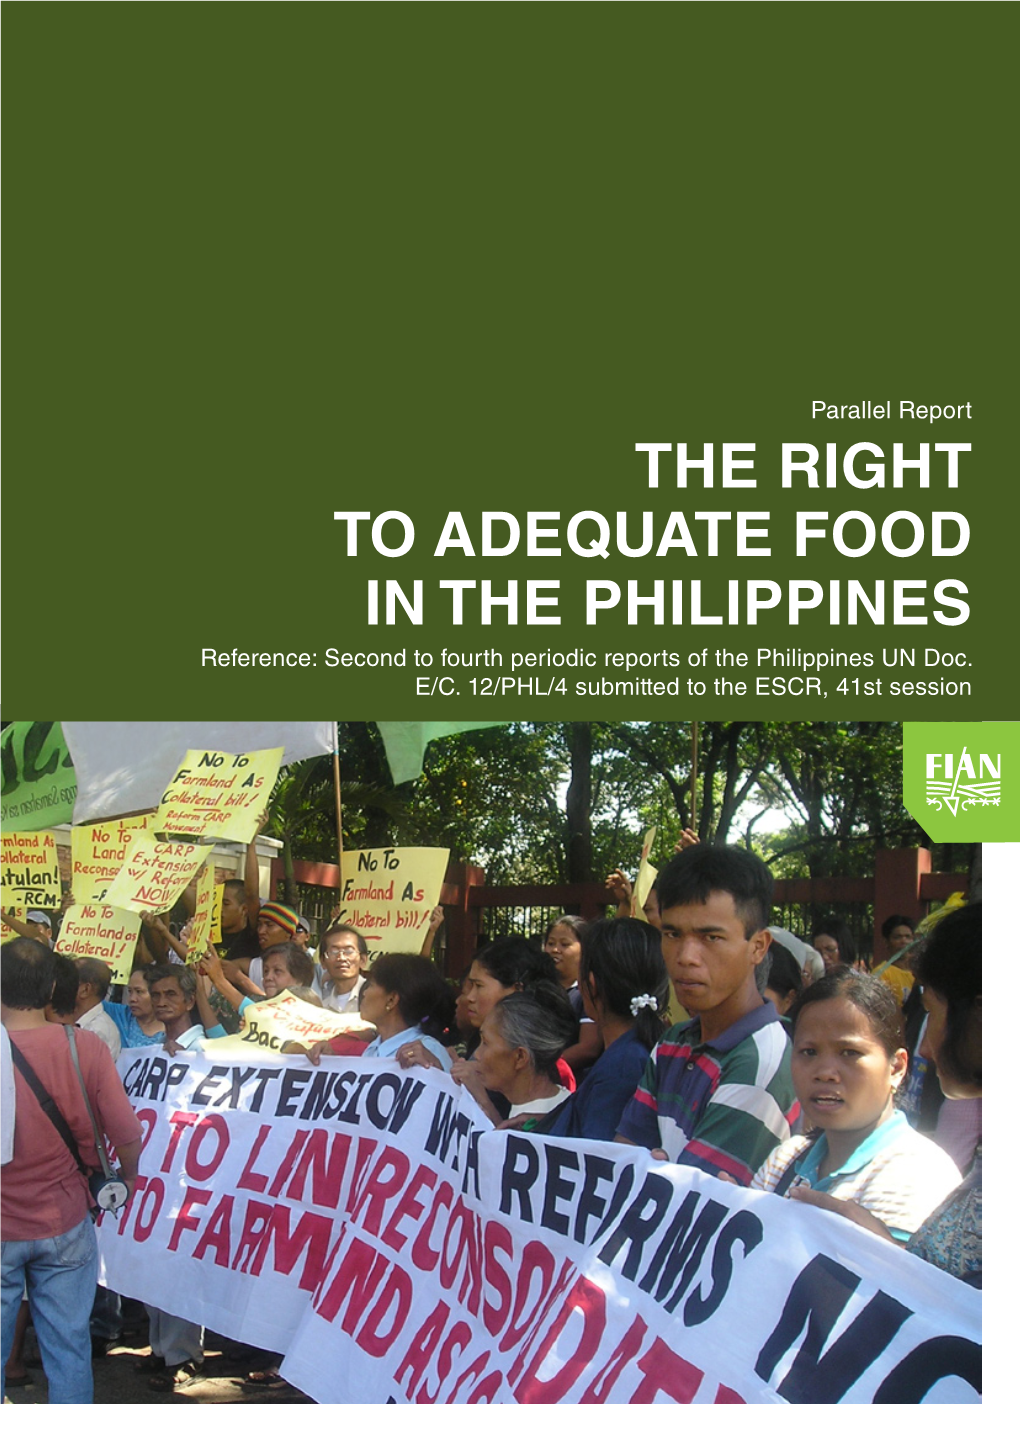 The Right to Adequate Food in the Philippines Reference: Second to Fourth Periodic Reports of the Philippines UN Doc